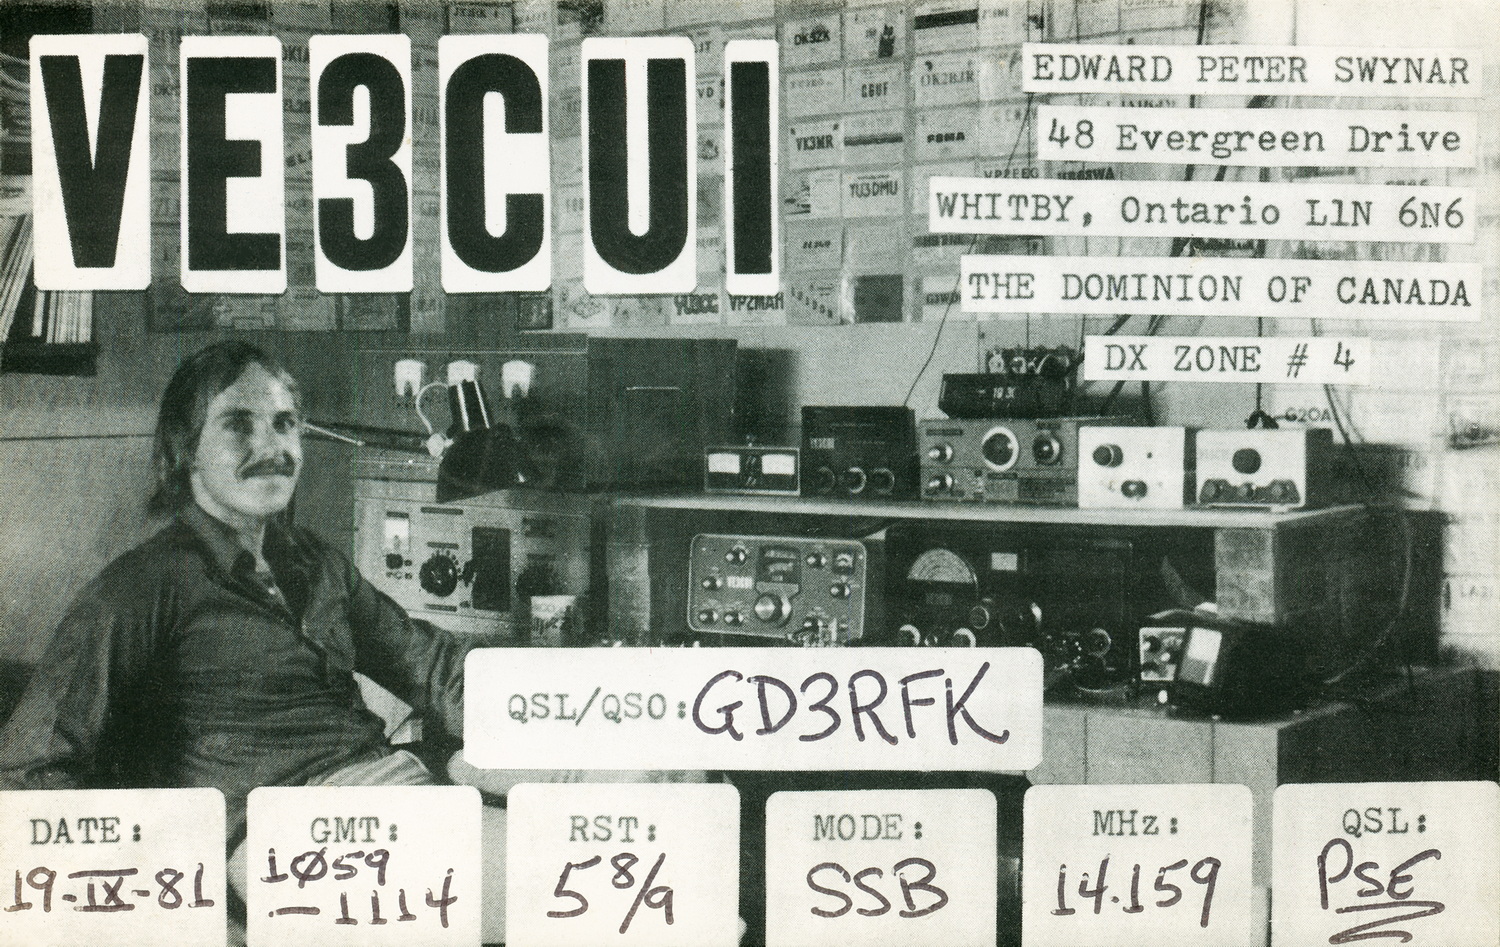 VE3CUI (Edward), QSO on 19th September 1981 on 14.159 MHz making a 15 minute chat on SSB